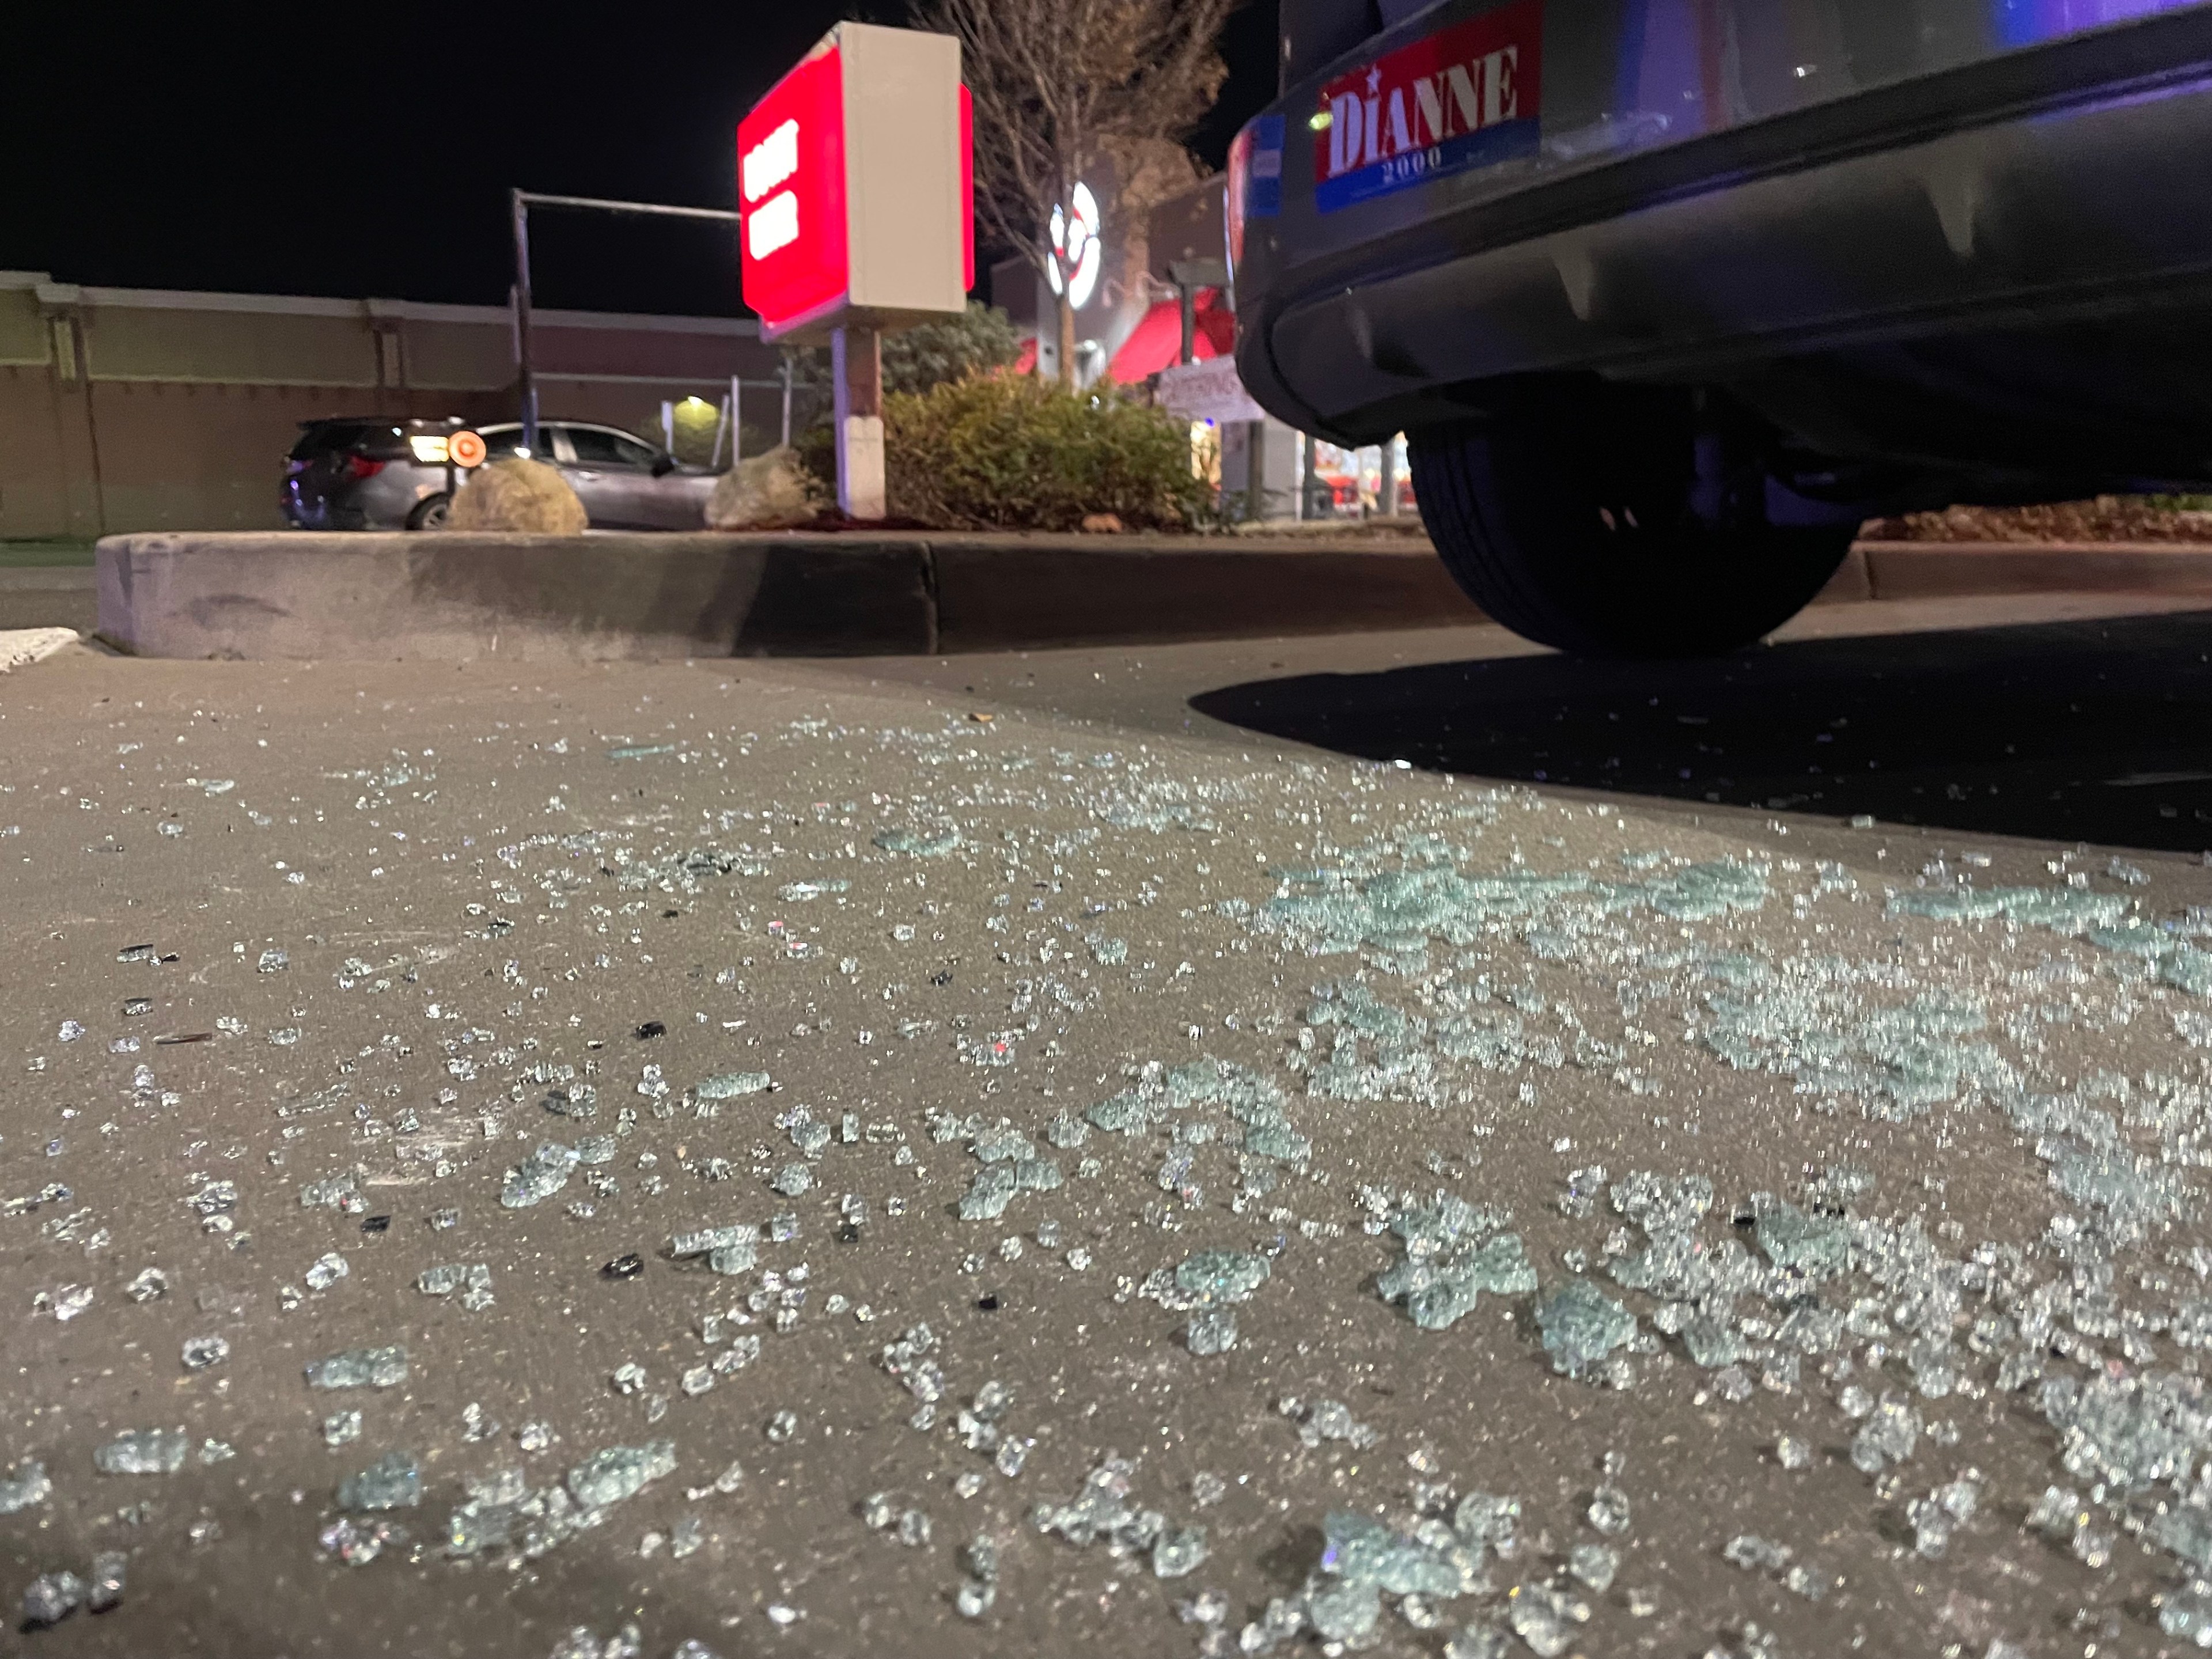 Smashed glass litters the pavement near a parked car.